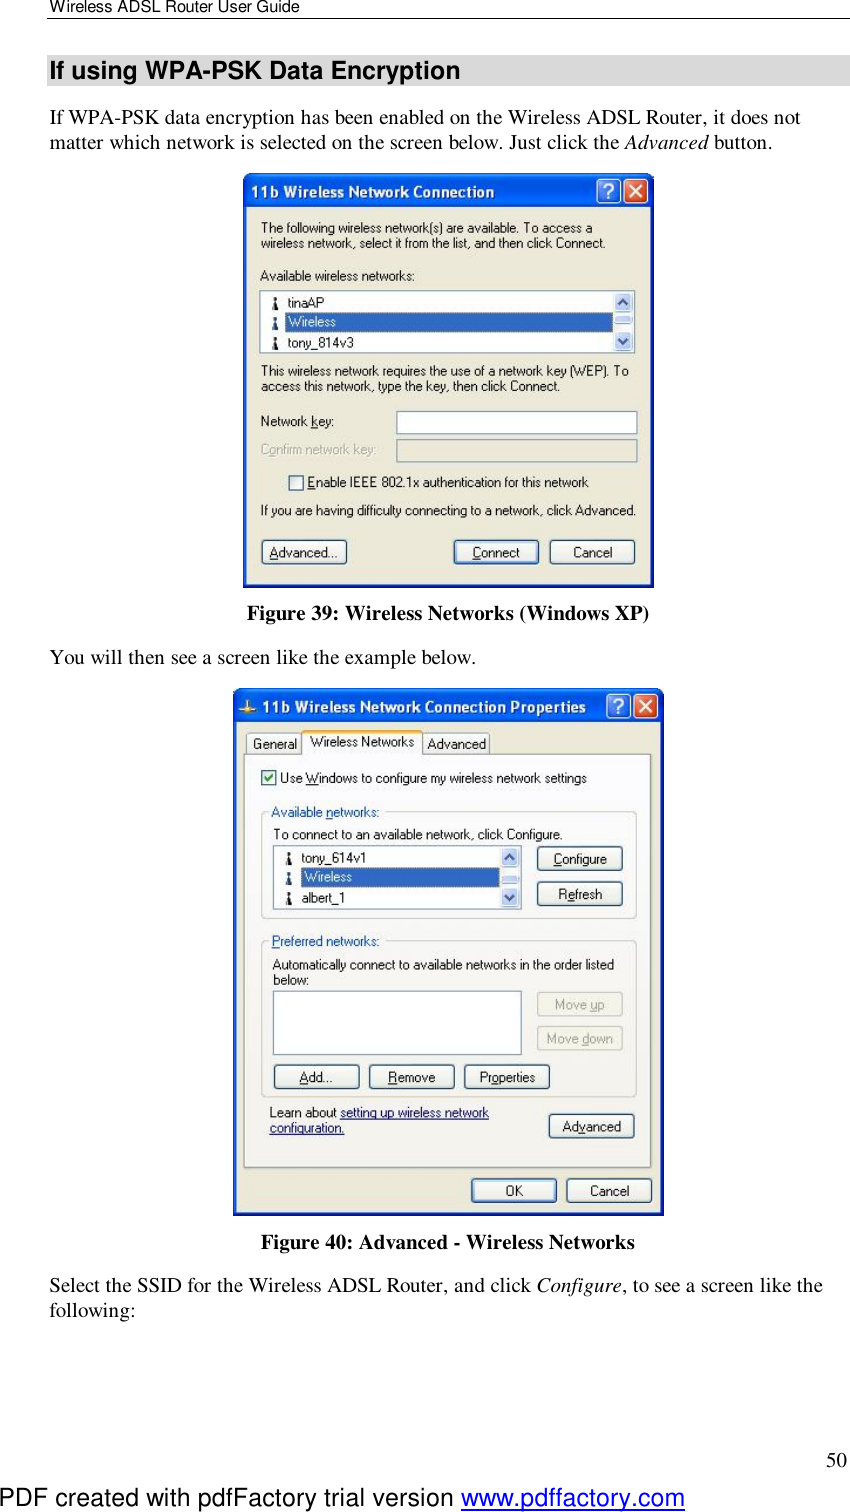 Wireless ADSL Router User Guide 50 If using WPA-PSK Data Encryption If WPA-PSK data encryption has been enabled on the Wireless ADSL Router, it does not matter which network is selected on the screen below. Just click the Advanced button.  Figure 39: Wireless Networks (Windows XP) You will then see a screen like the example below.  Figure 40: Advanced - Wireless Networks Select the SSID for the Wireless ADSL Router, and click Configure, to see a screen like the following: PDF created with pdfFactory trial version www.pdffactory.com